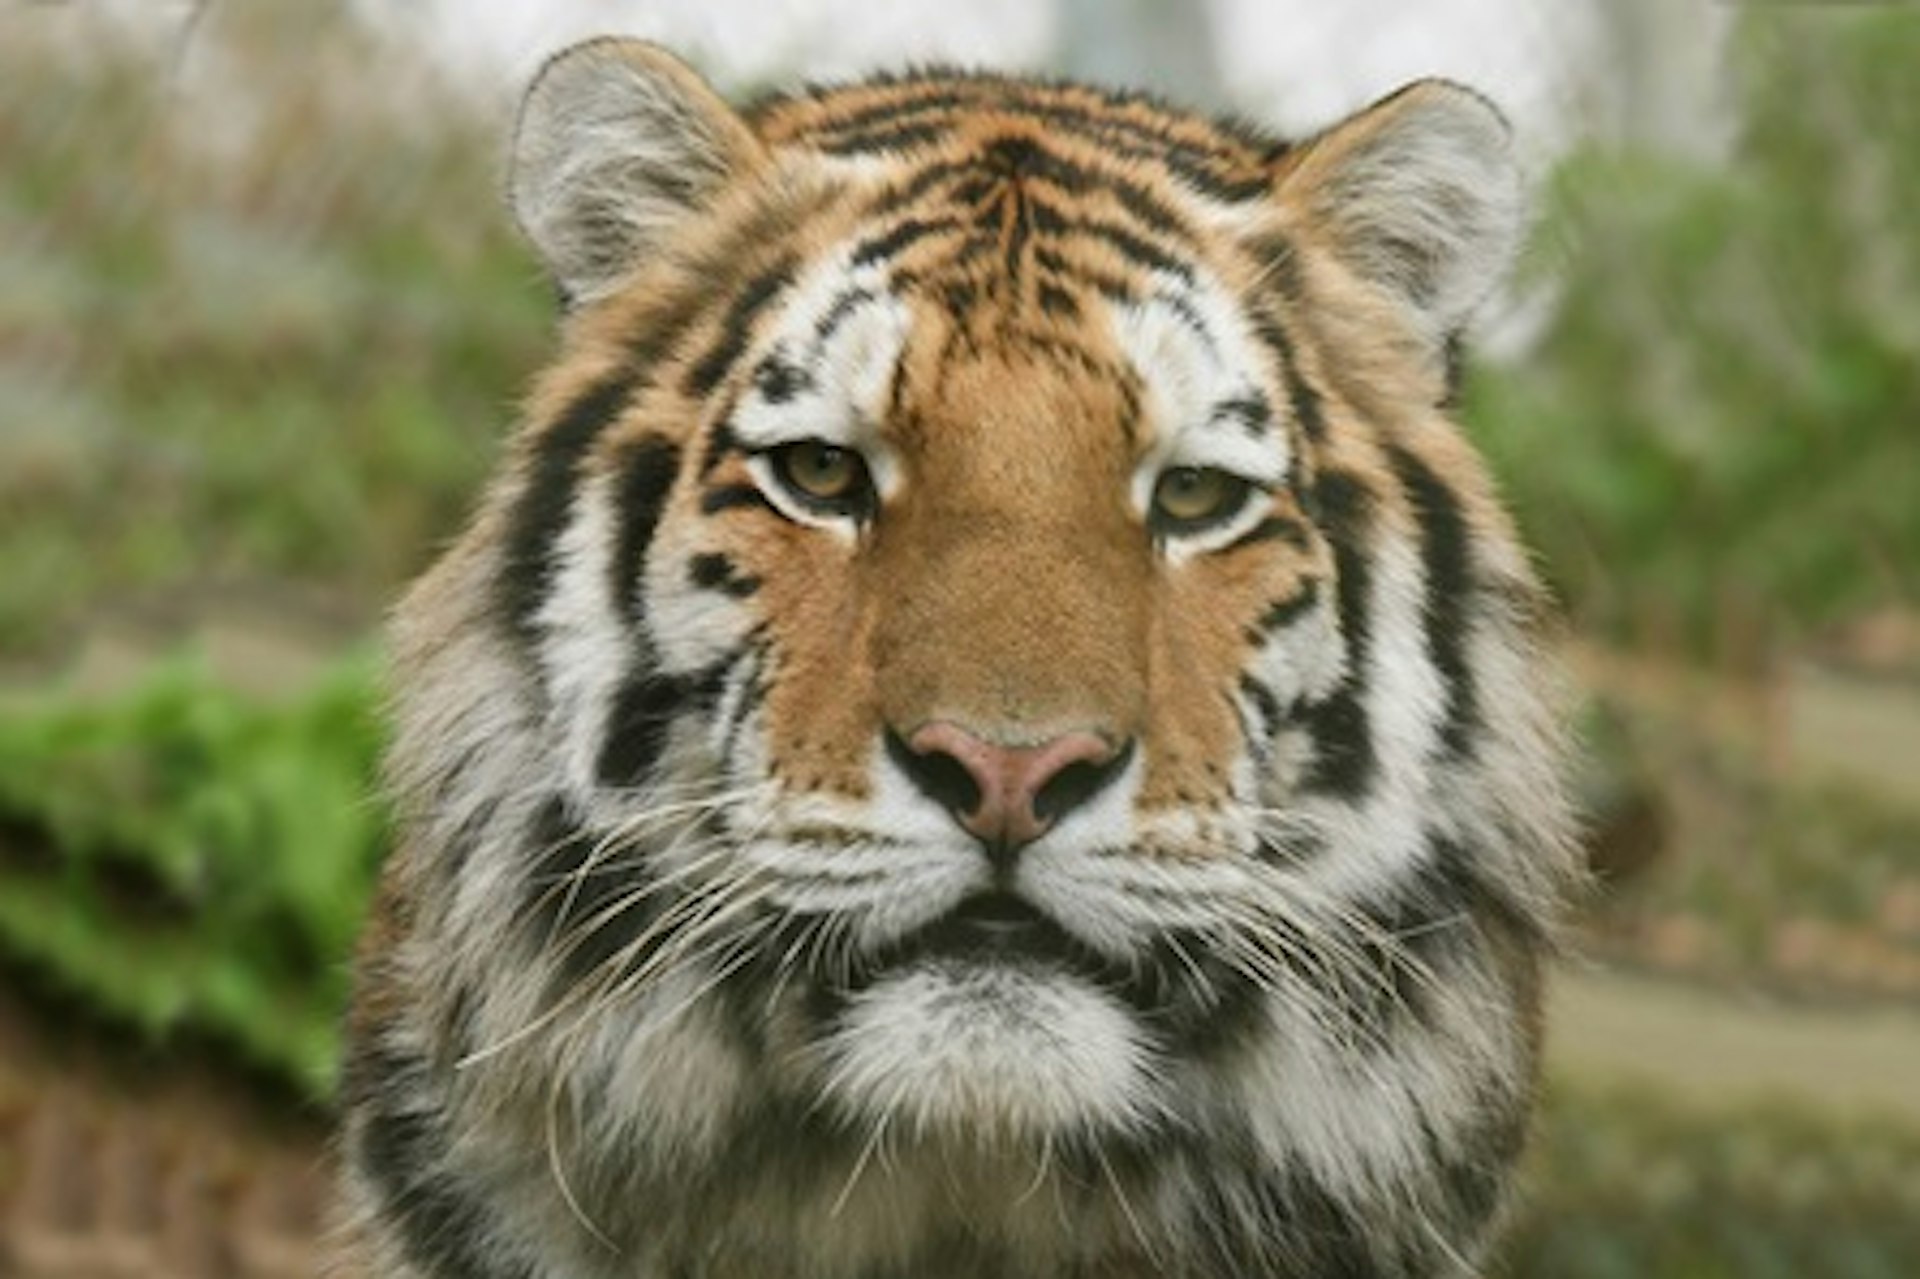 Tiger Encounter for Two at Dartmoor Zoo 3